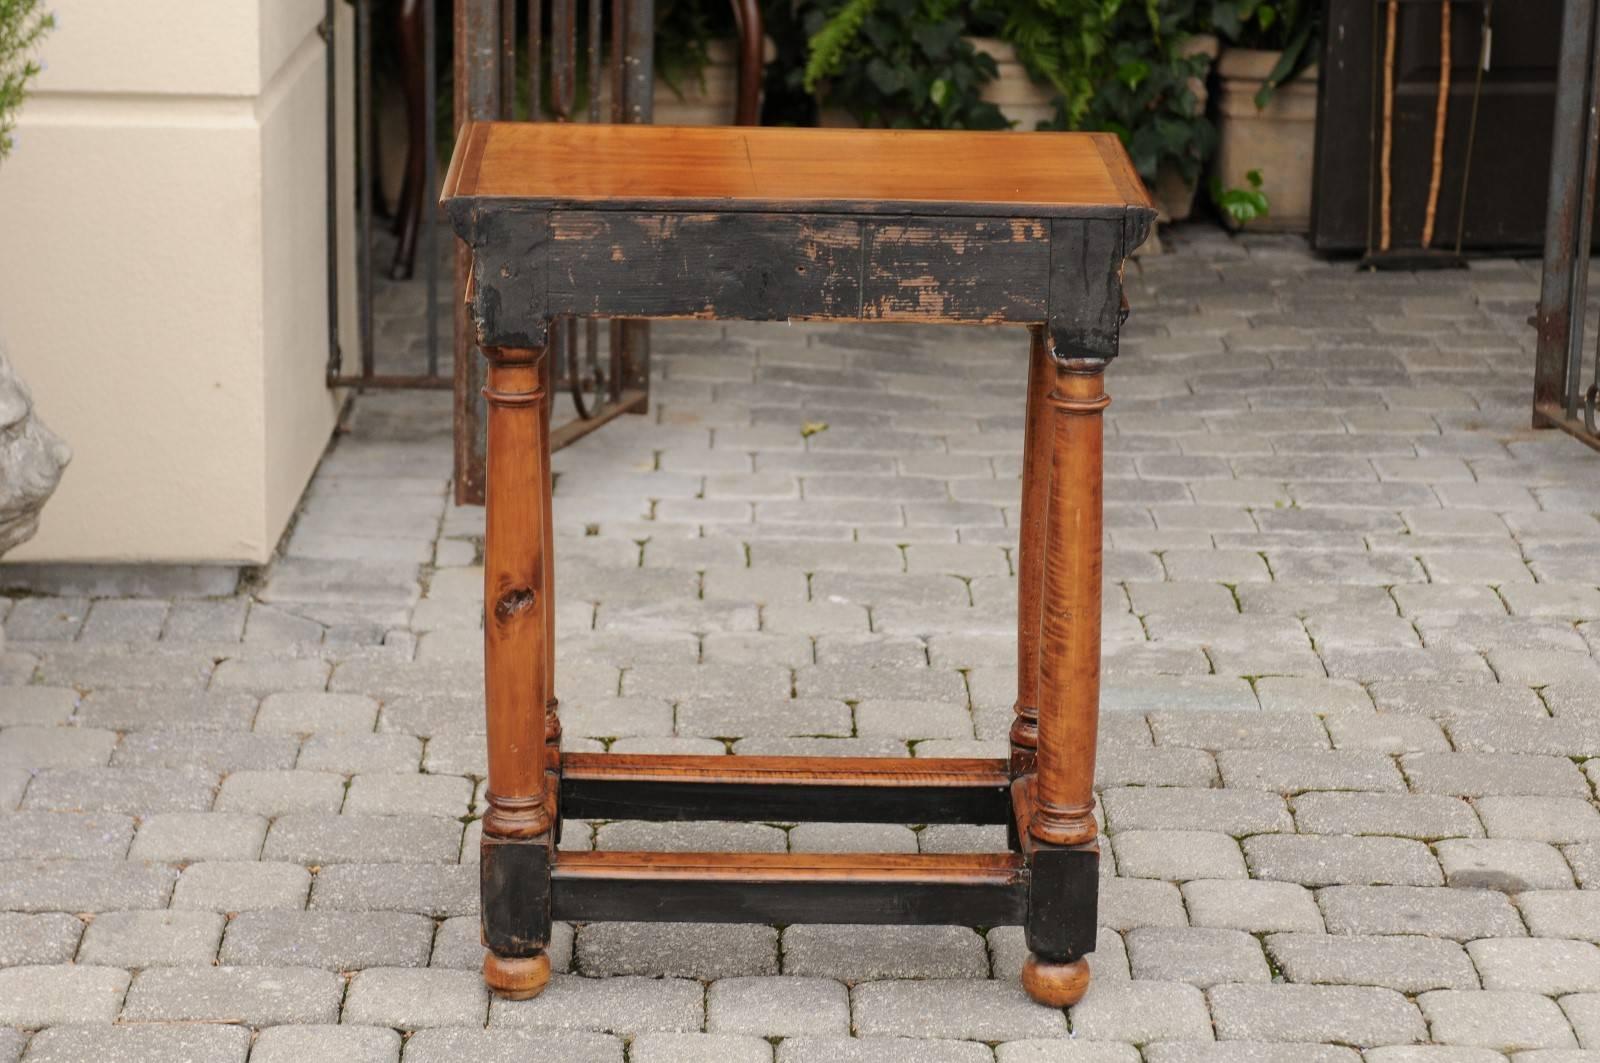 French Empire Style Mid-19th Century Fruitwood Side Table with Doric Column Legs For Sale 3